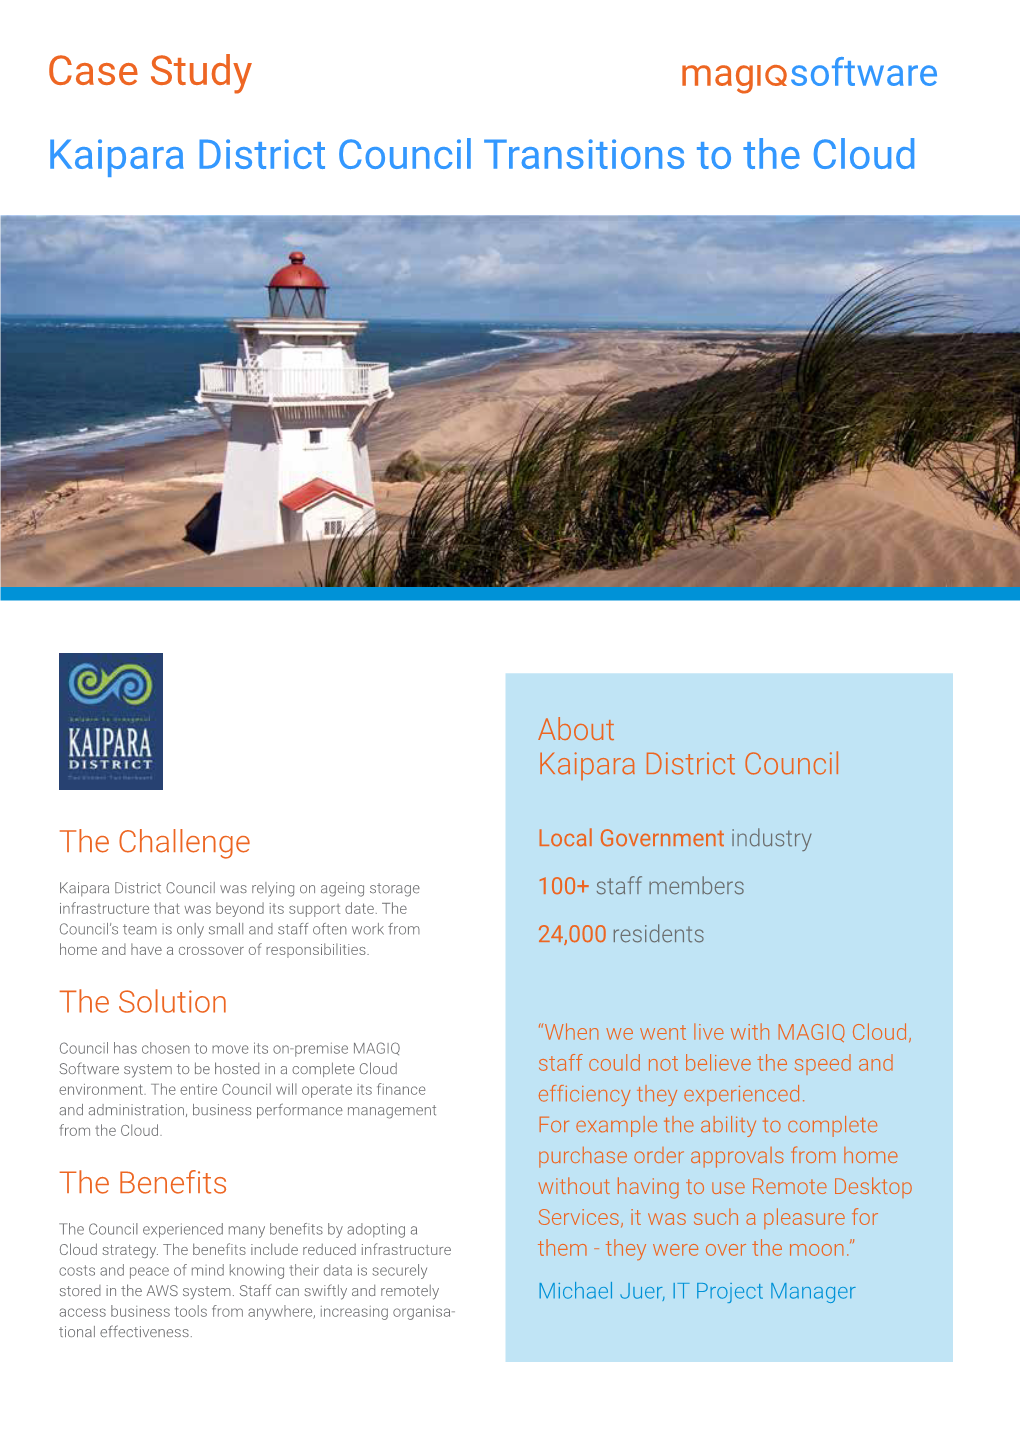 Kaipara District Council Transitions to the Cloud Digital